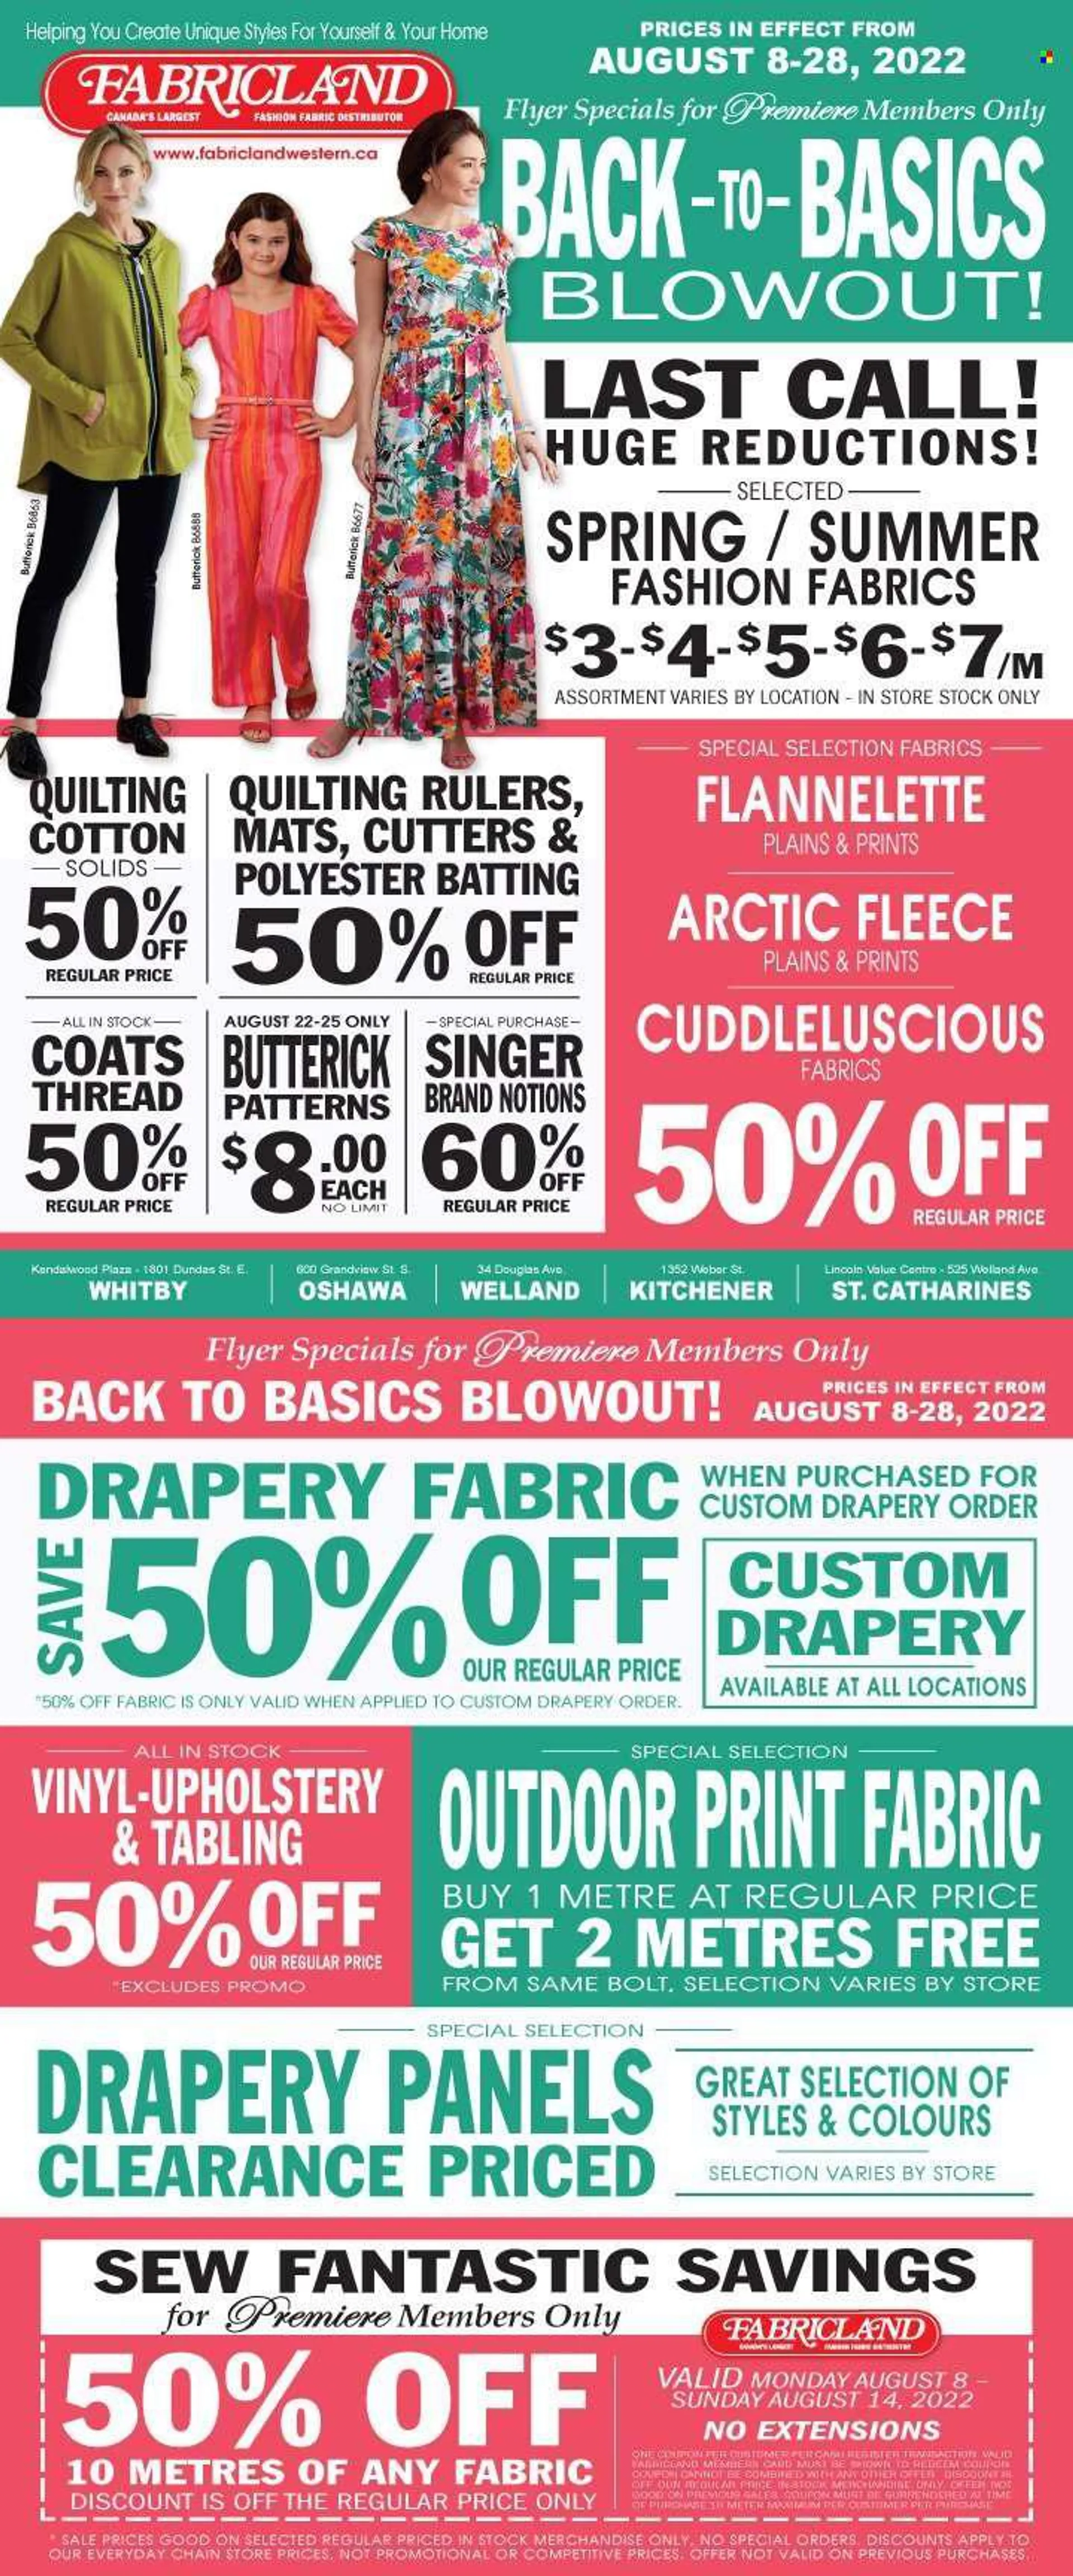 FABRICLAND Flyer - August 08, 2022 - August 28, 2022.